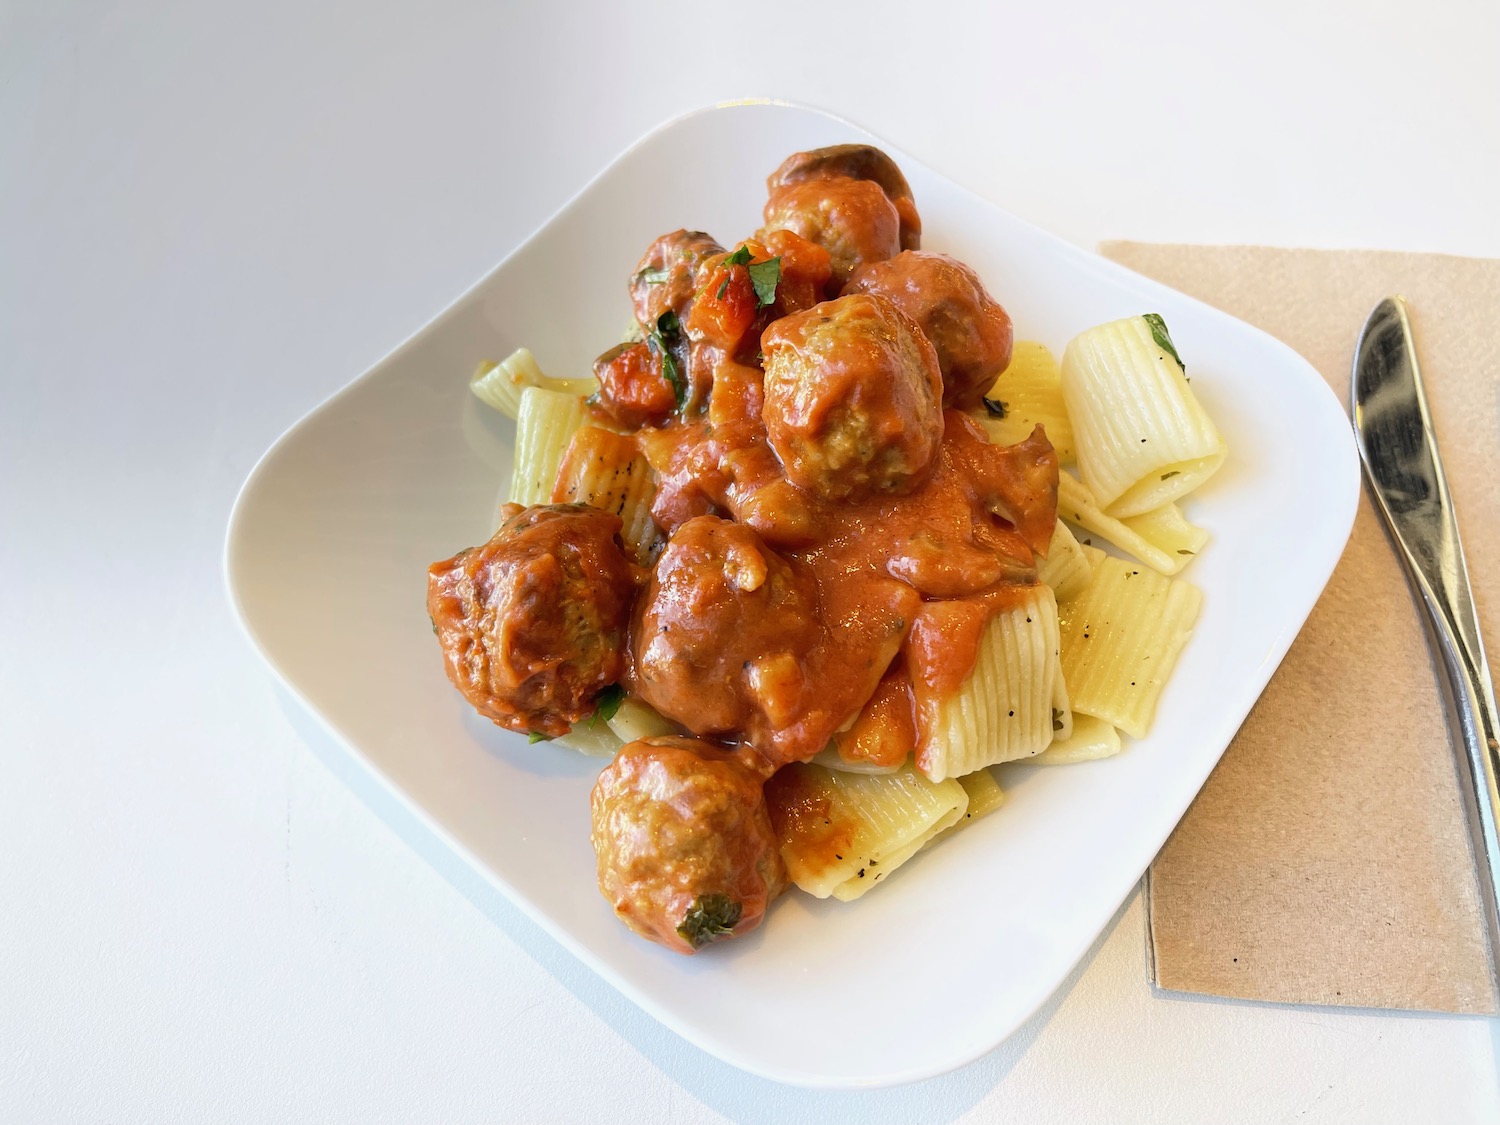 a plate of pasta with meatballs and sauce